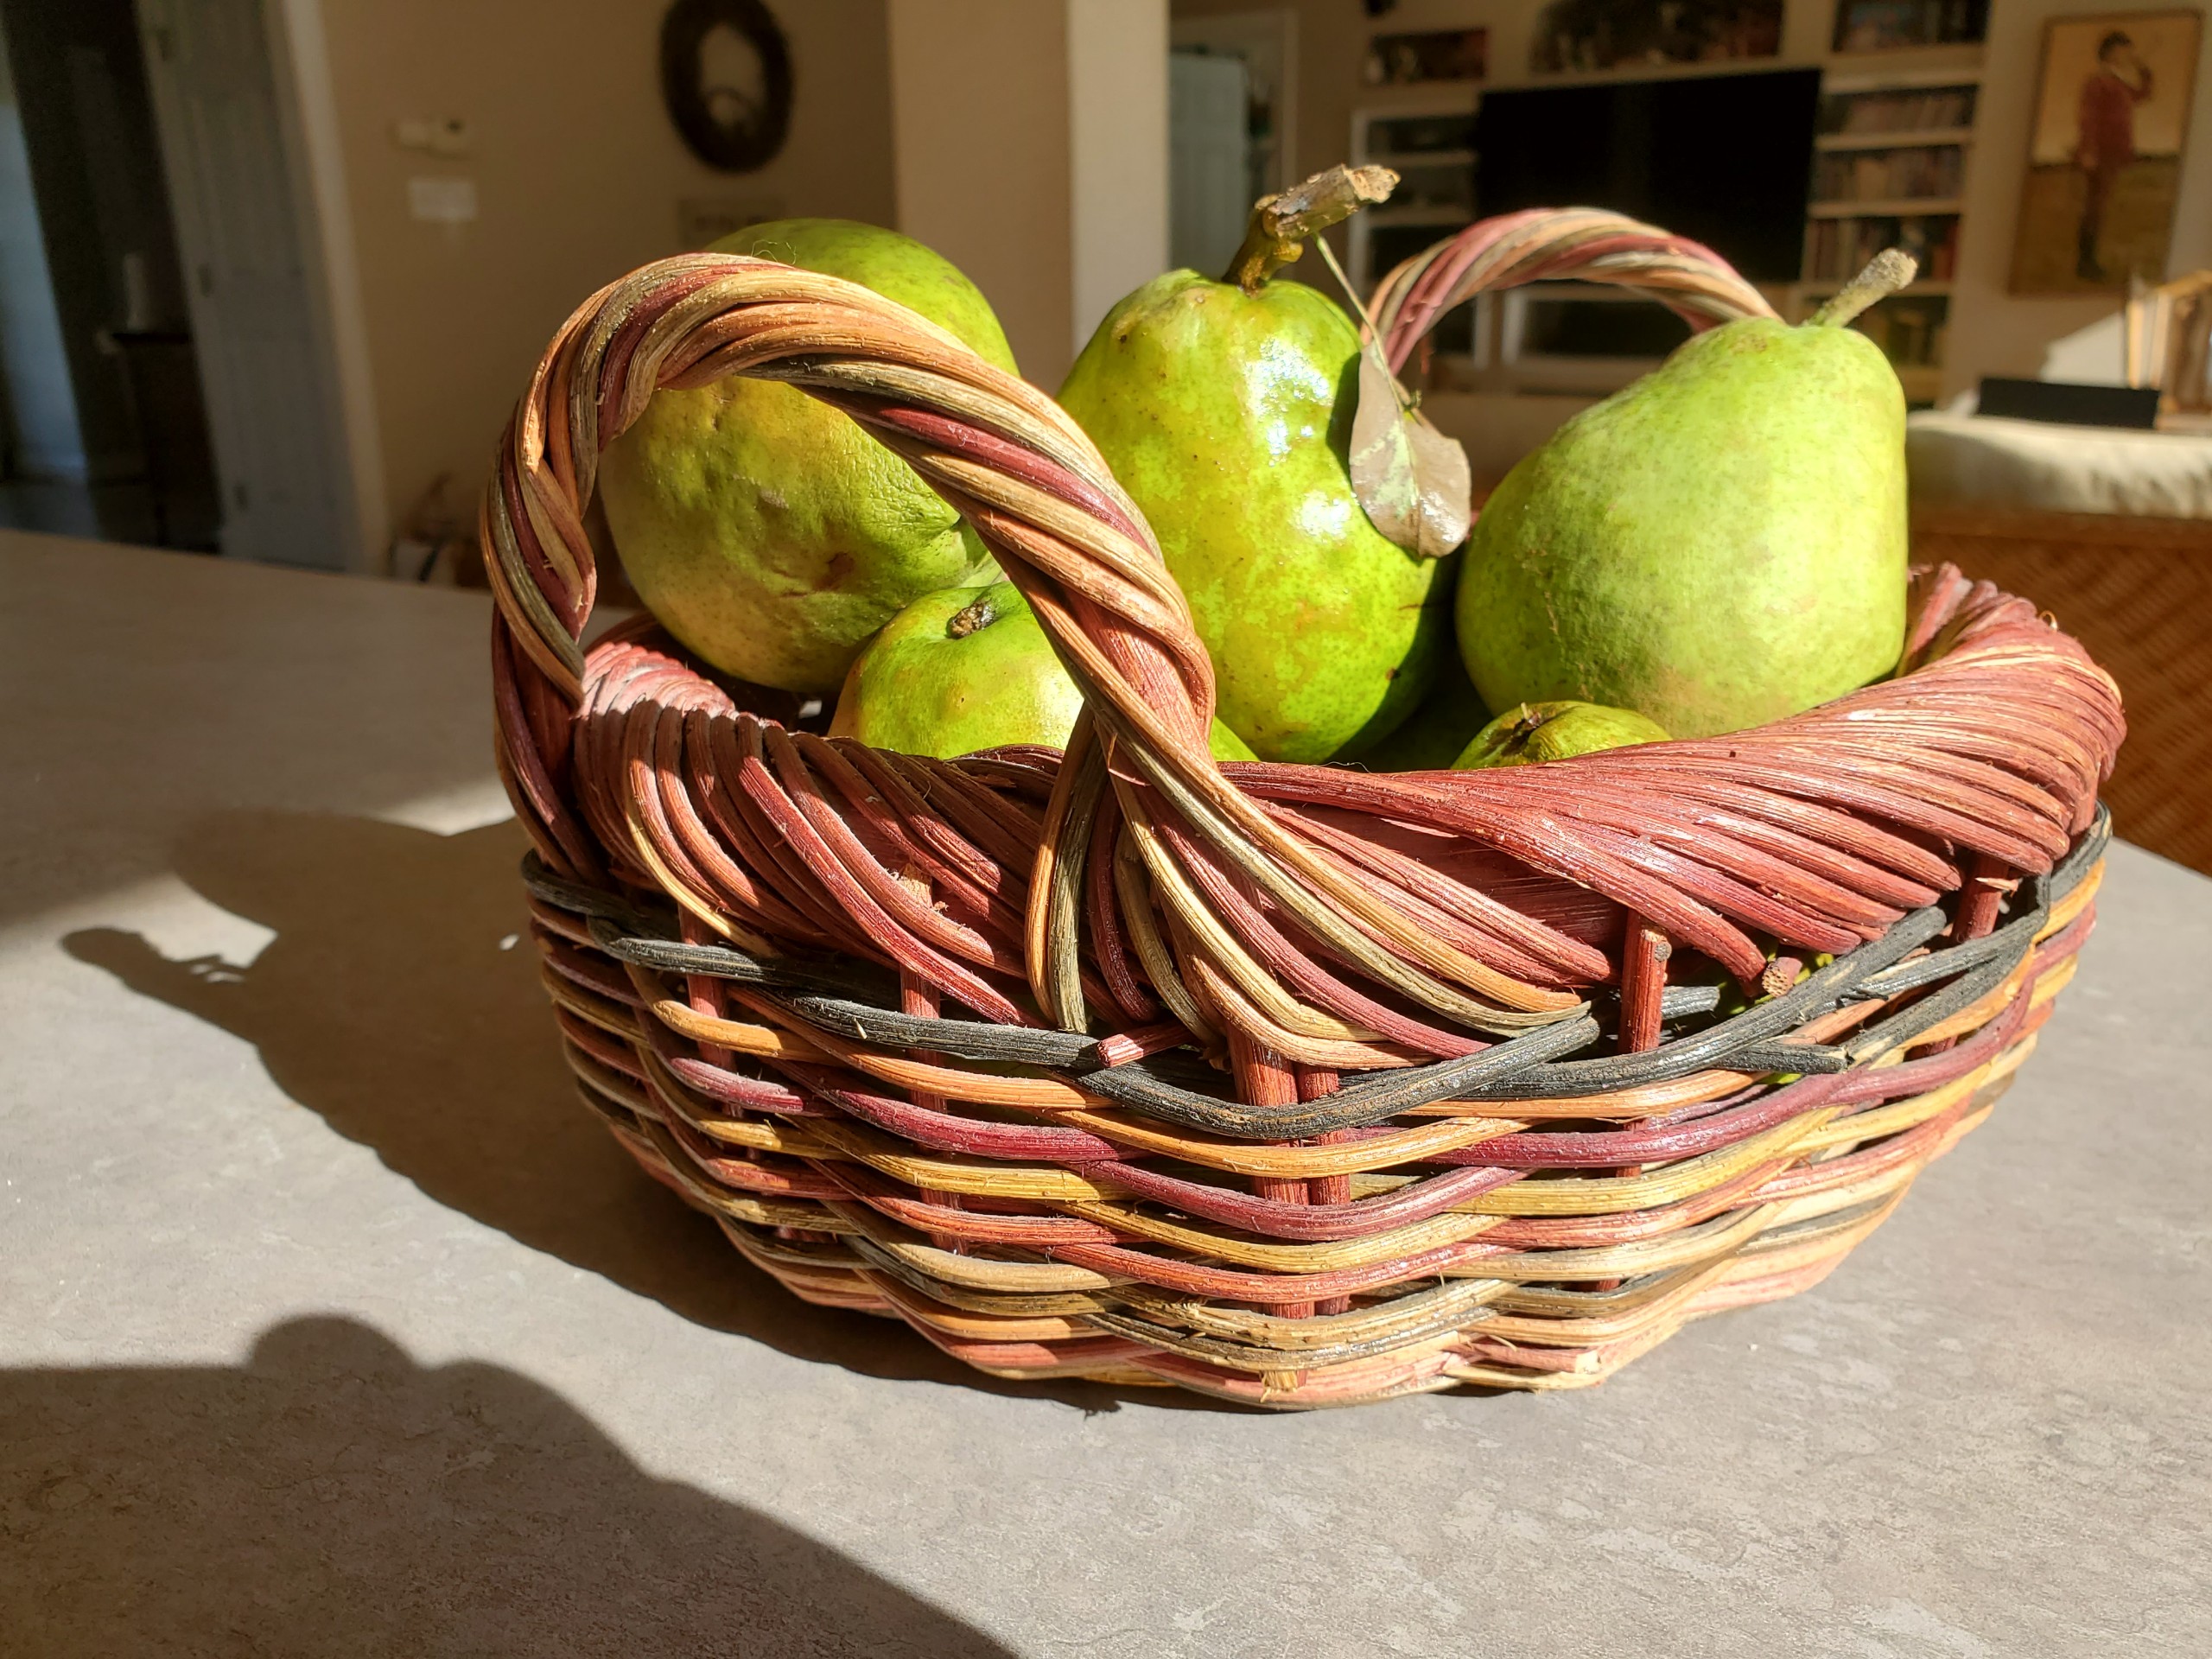 Virginia local fresh picked pears at Old Apple Valley Farms